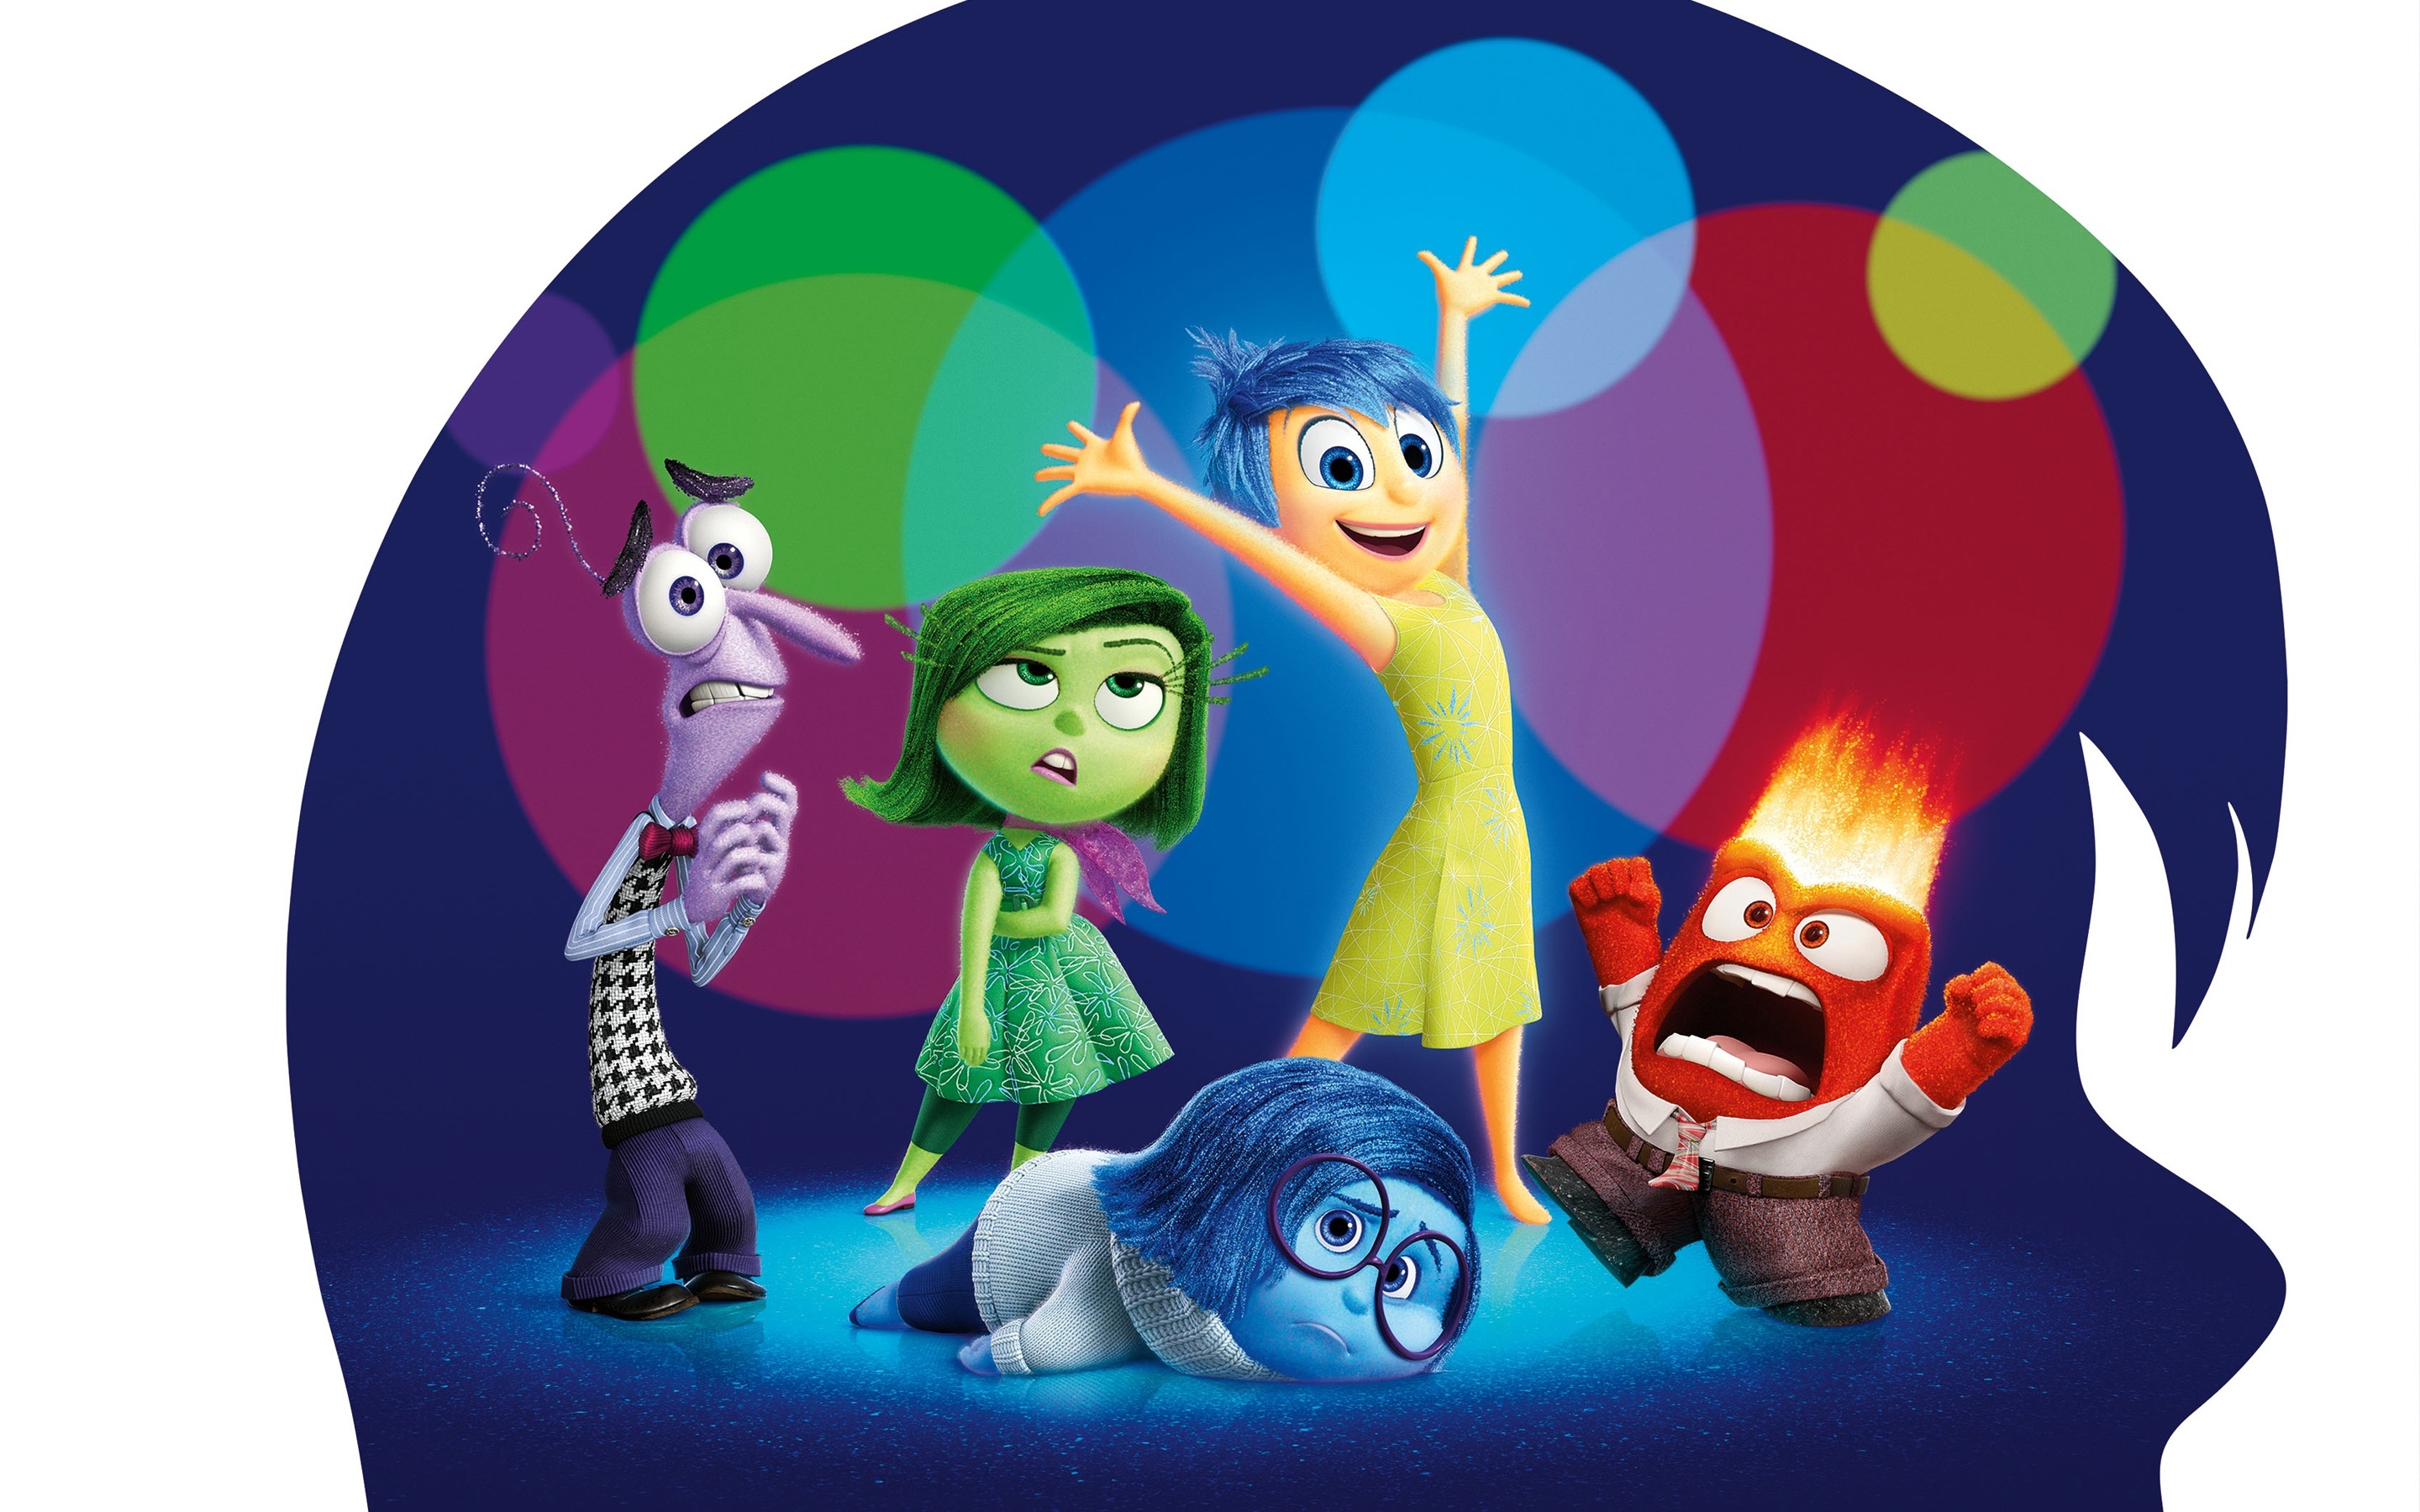 Inside Out Movie 2015 HD Wallpaper   iHD Wallpapers